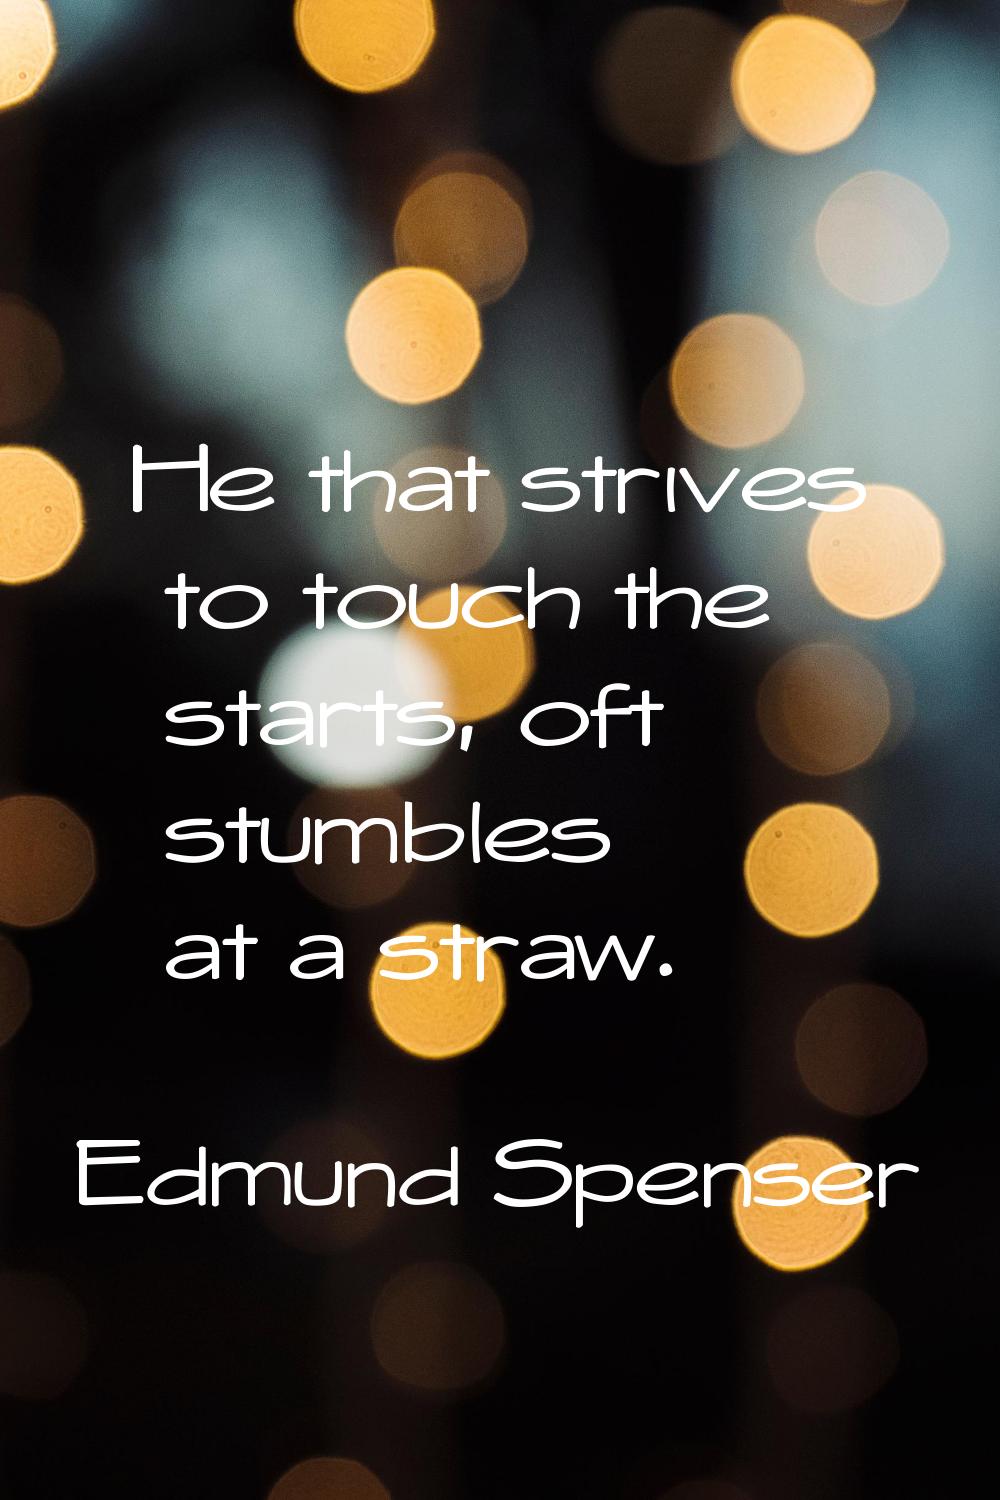 He that strives to touch the starts, oft stumbles at a straw.